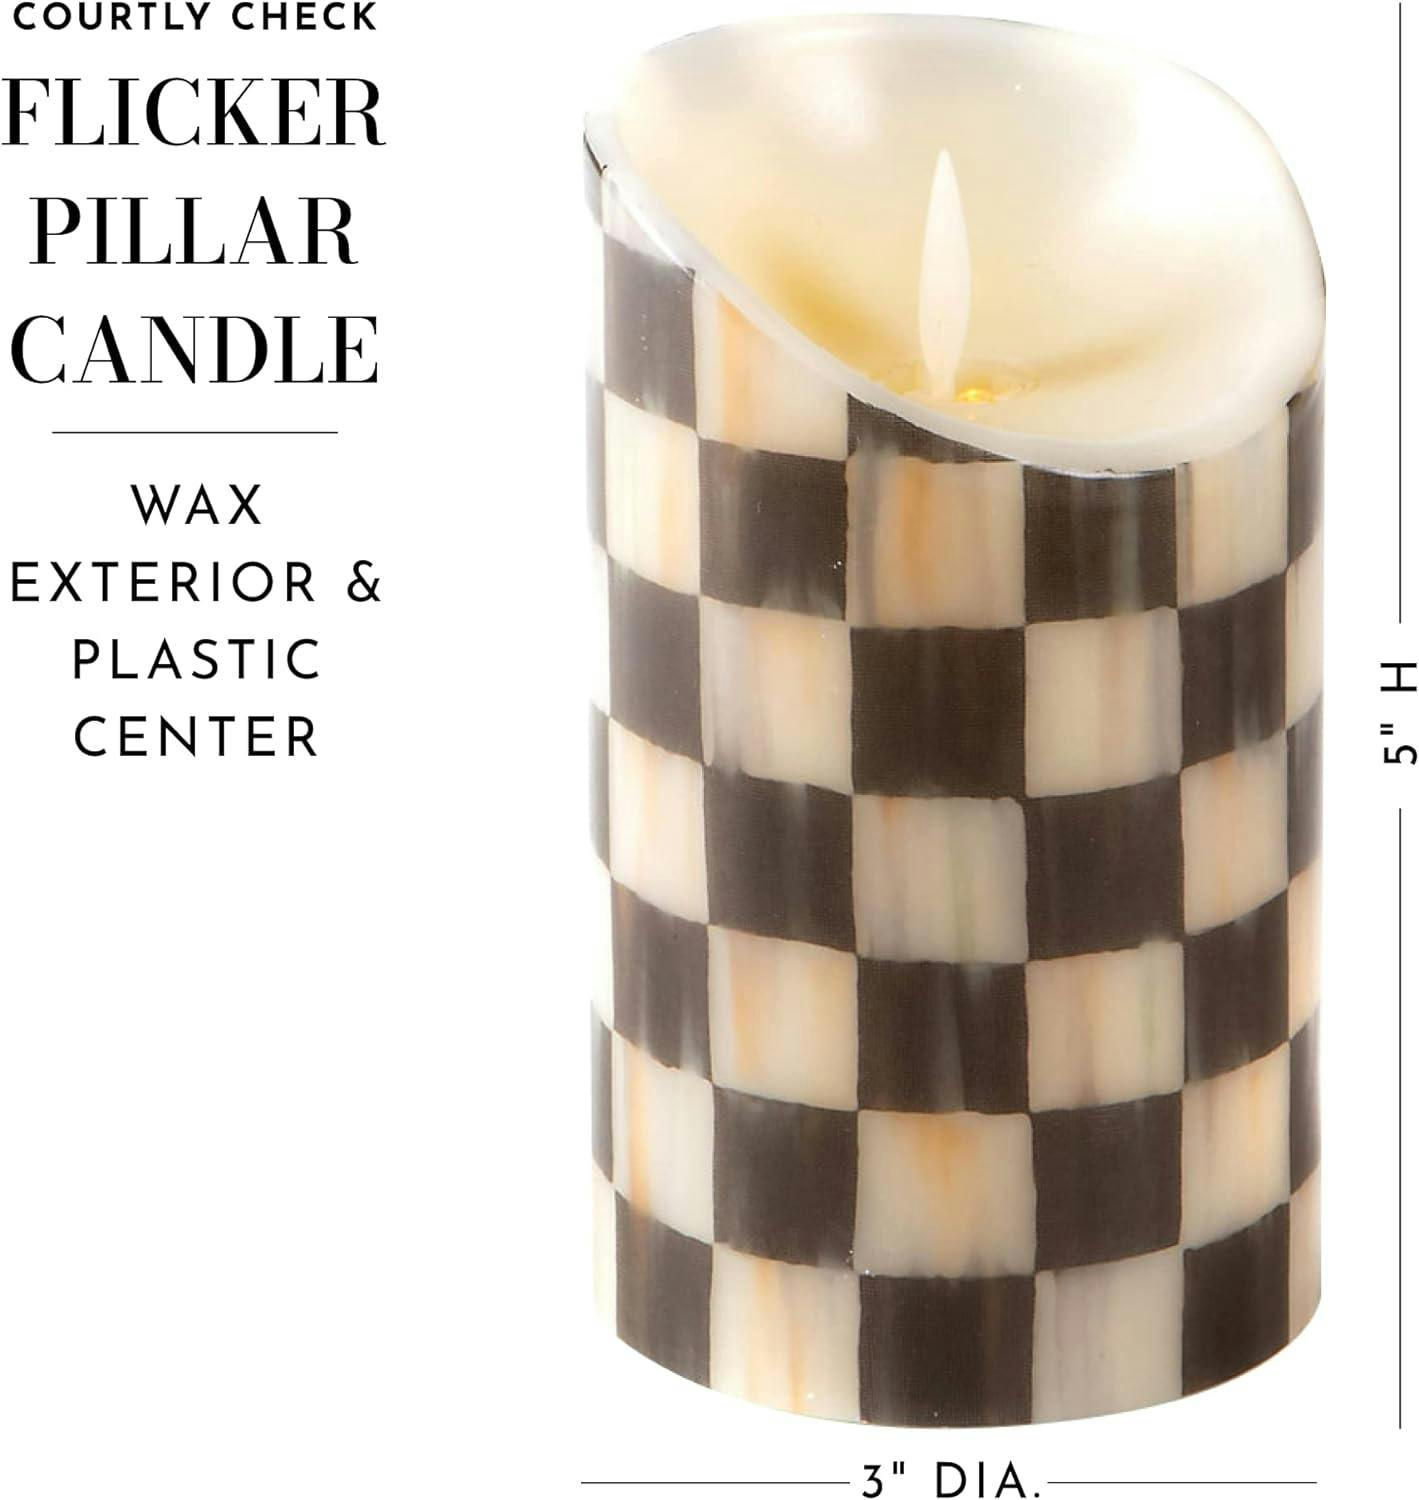 Courtly Check 5" Royal Flicker Flameless Pillar Candle with Remote